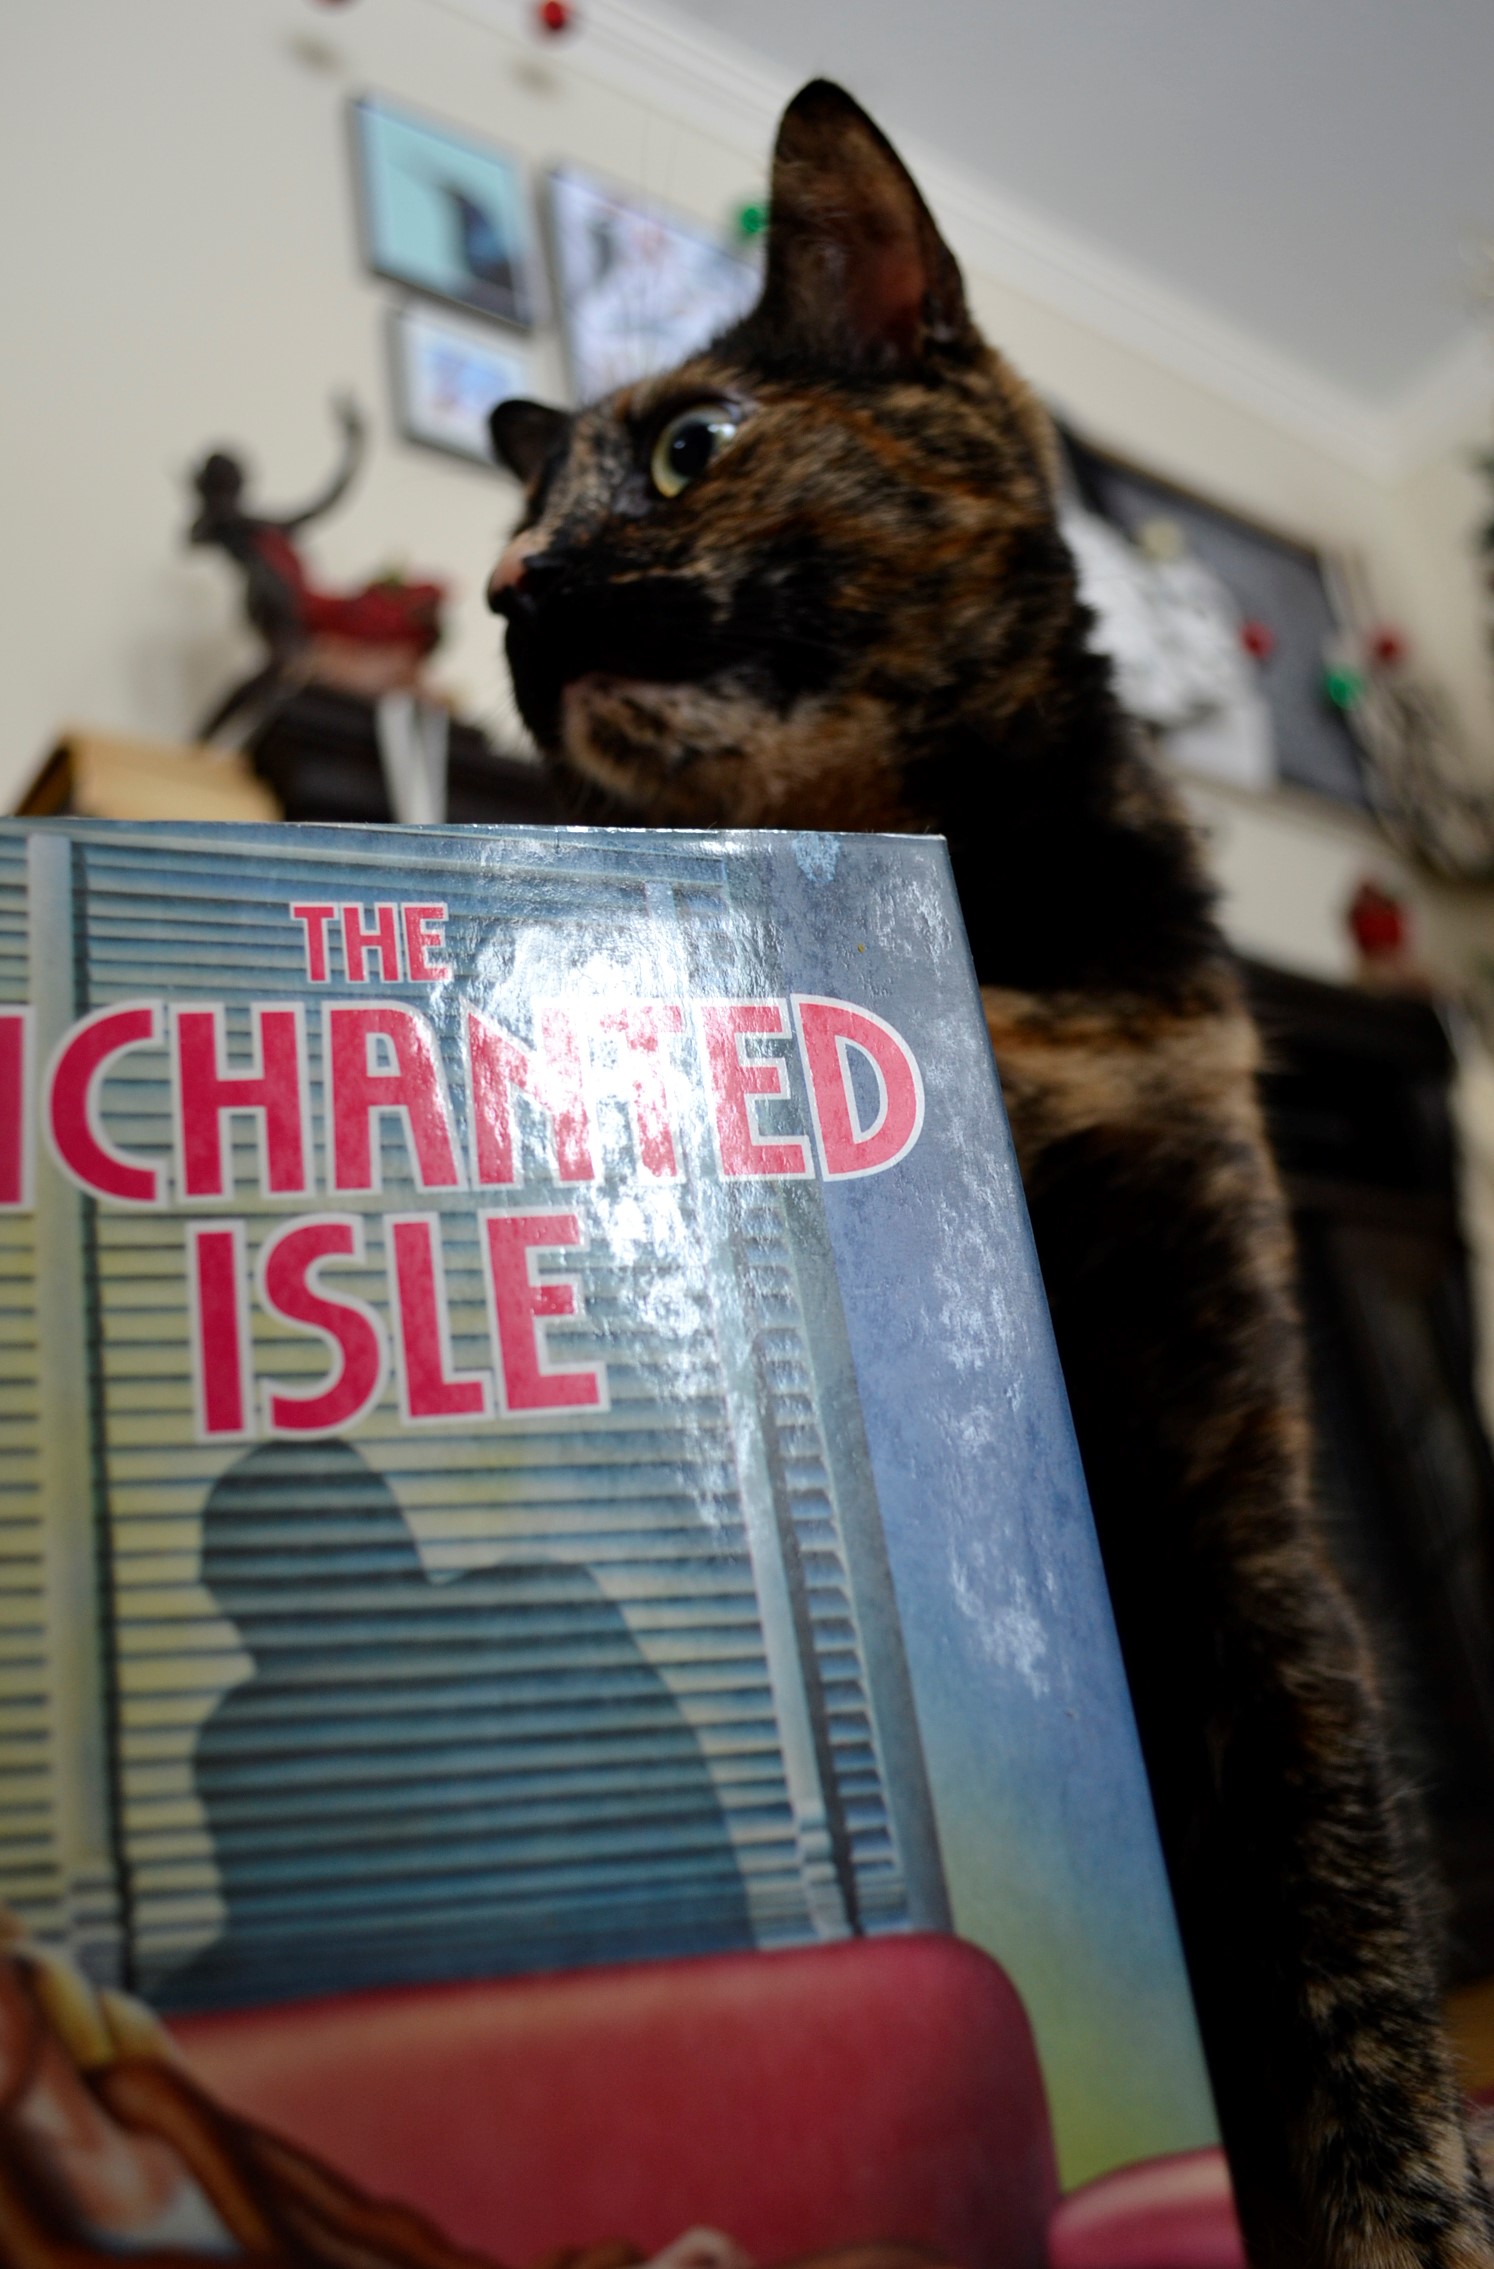 A tortoiseshell cat looms of a cover reading 'The Enchanted Isle'.